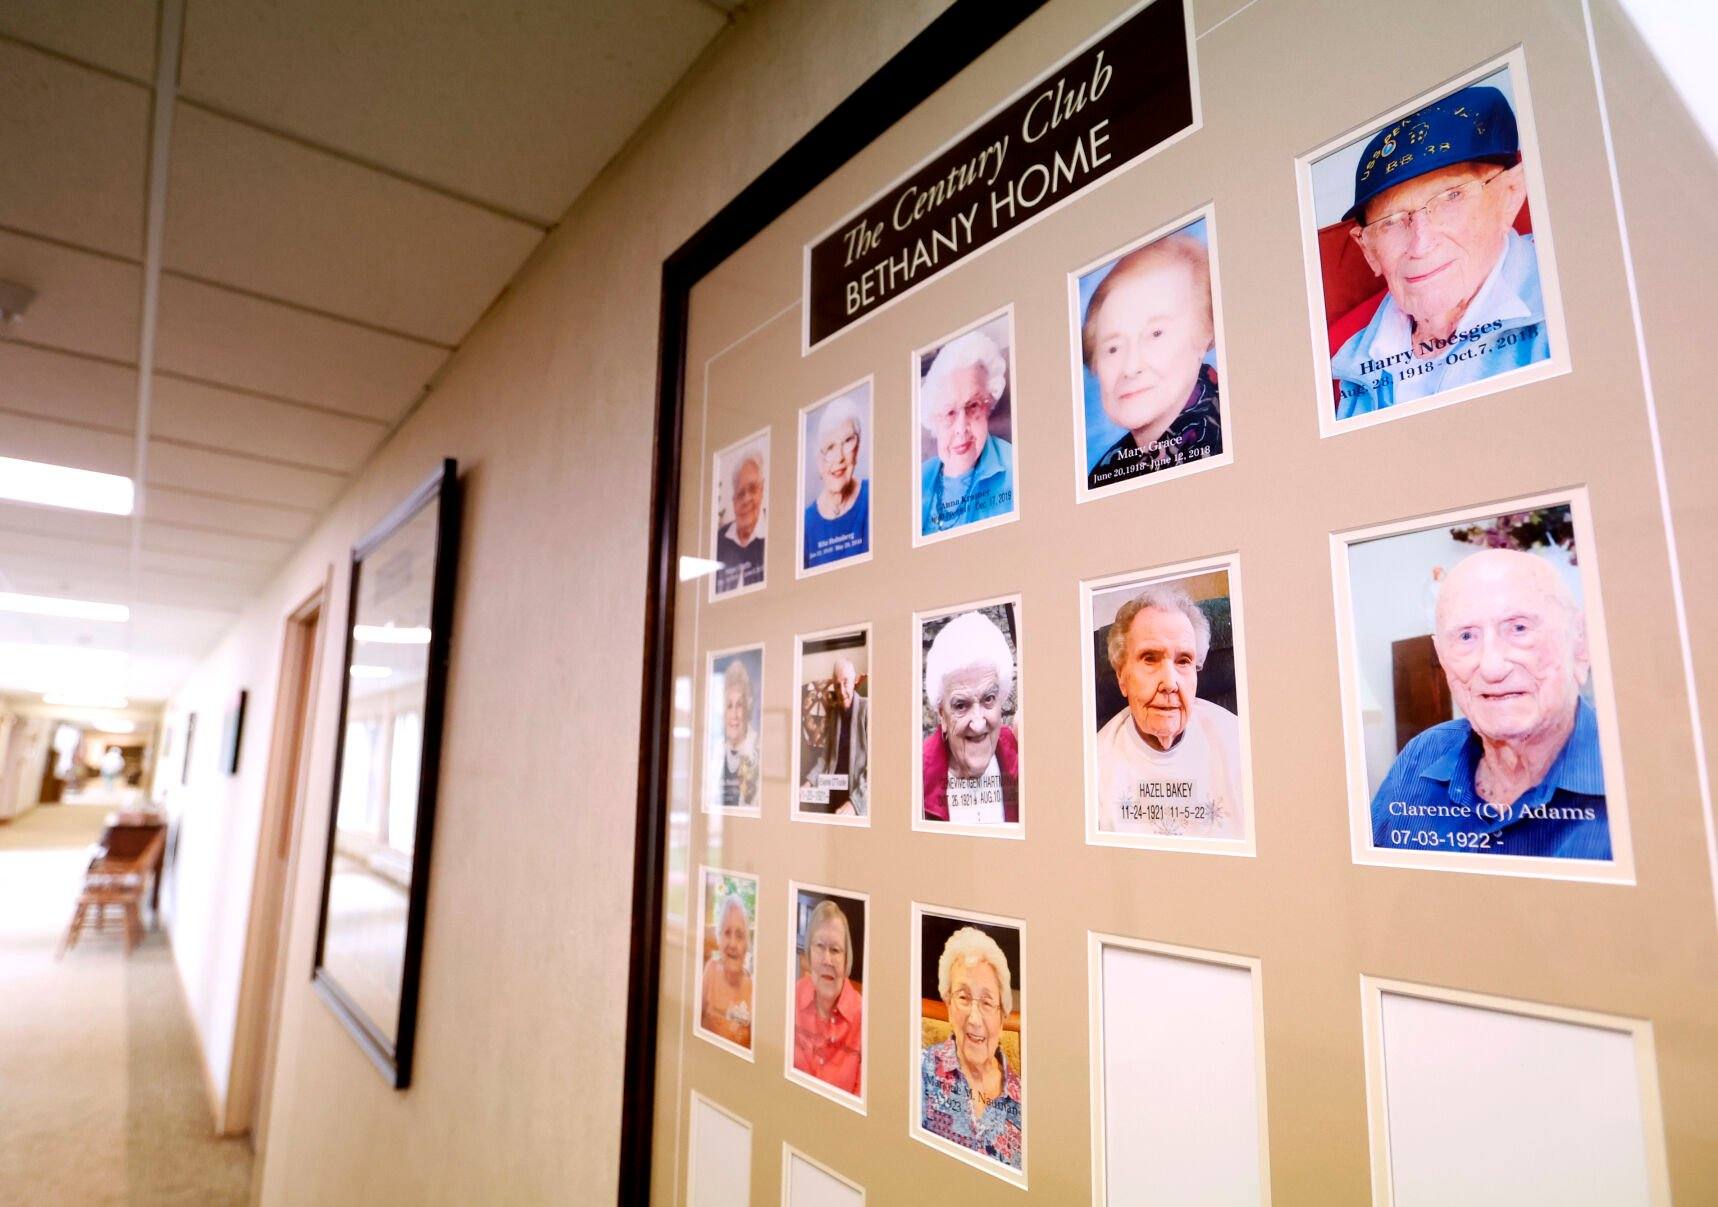 Photos hang on the wall at Bethany Home in Dubuque.    PHOTO CREDIT: JESSICA REILLY
Telegraph Herald